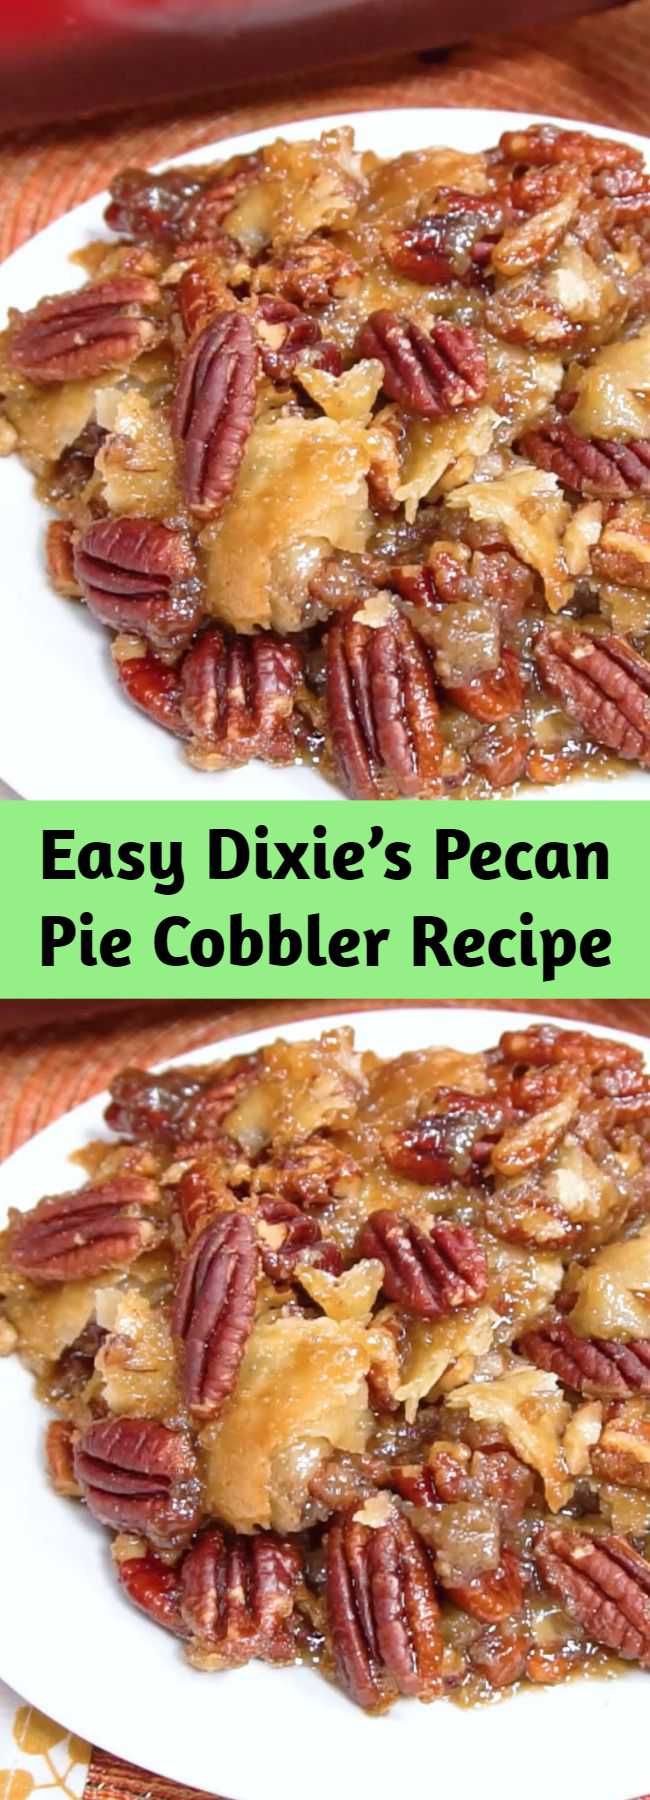 Easy Dixie’s Pecan Pie Cobbler Recipe - Dixie’s Pecan Pie Cobbler takes pecan pie to a whole new level! The bottom crust is topped with a delicious pecan custard, another crust and more pecans. After just one bite of Dixie’s Pecan Pie Cobbler, you will be hooked!